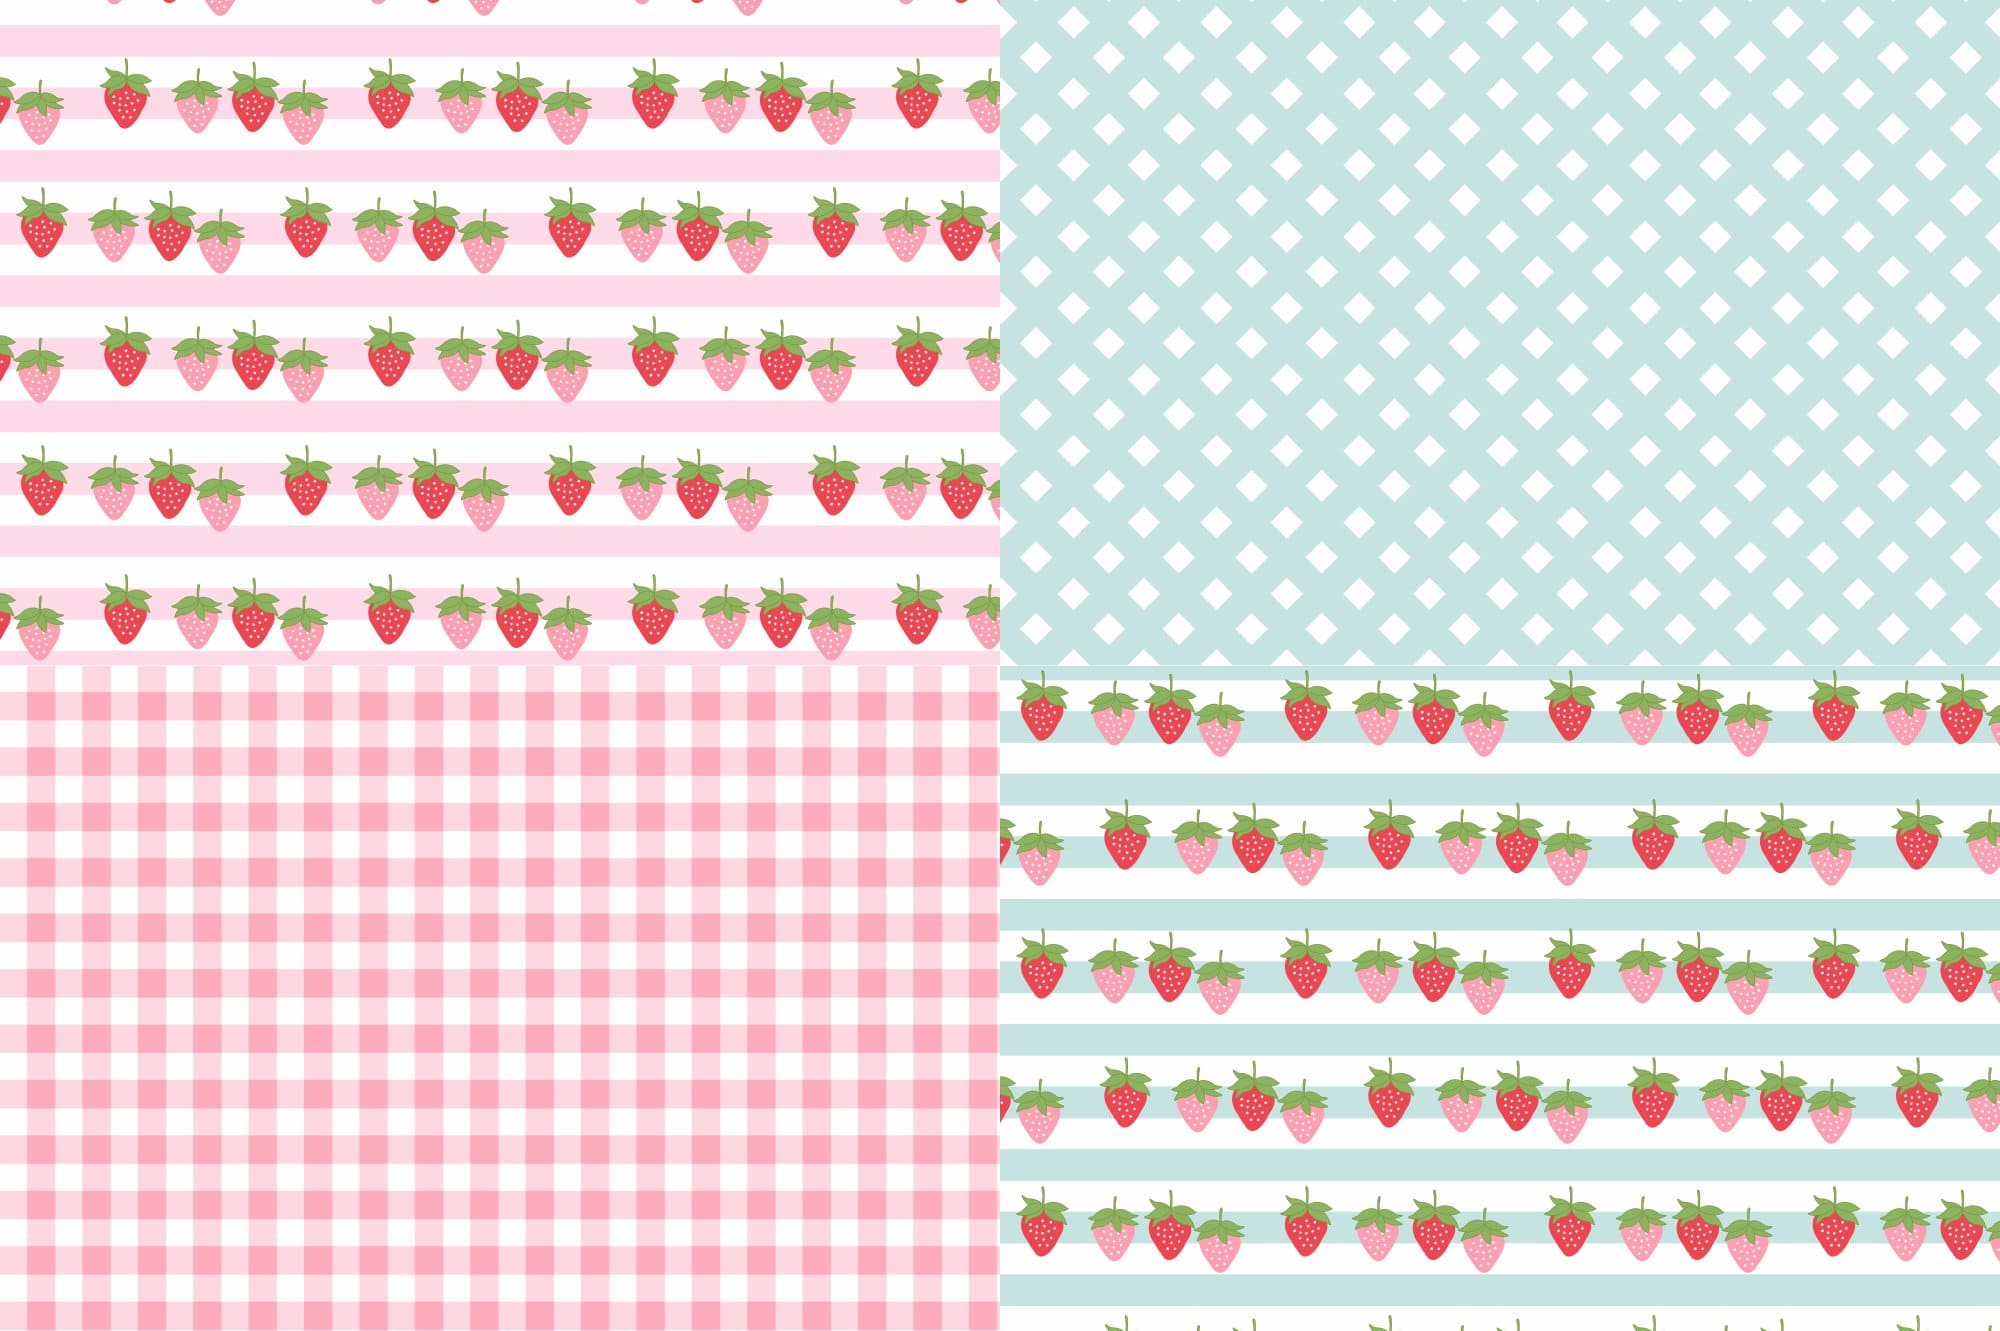 Two geometric patterns, two patterns with strawberries.